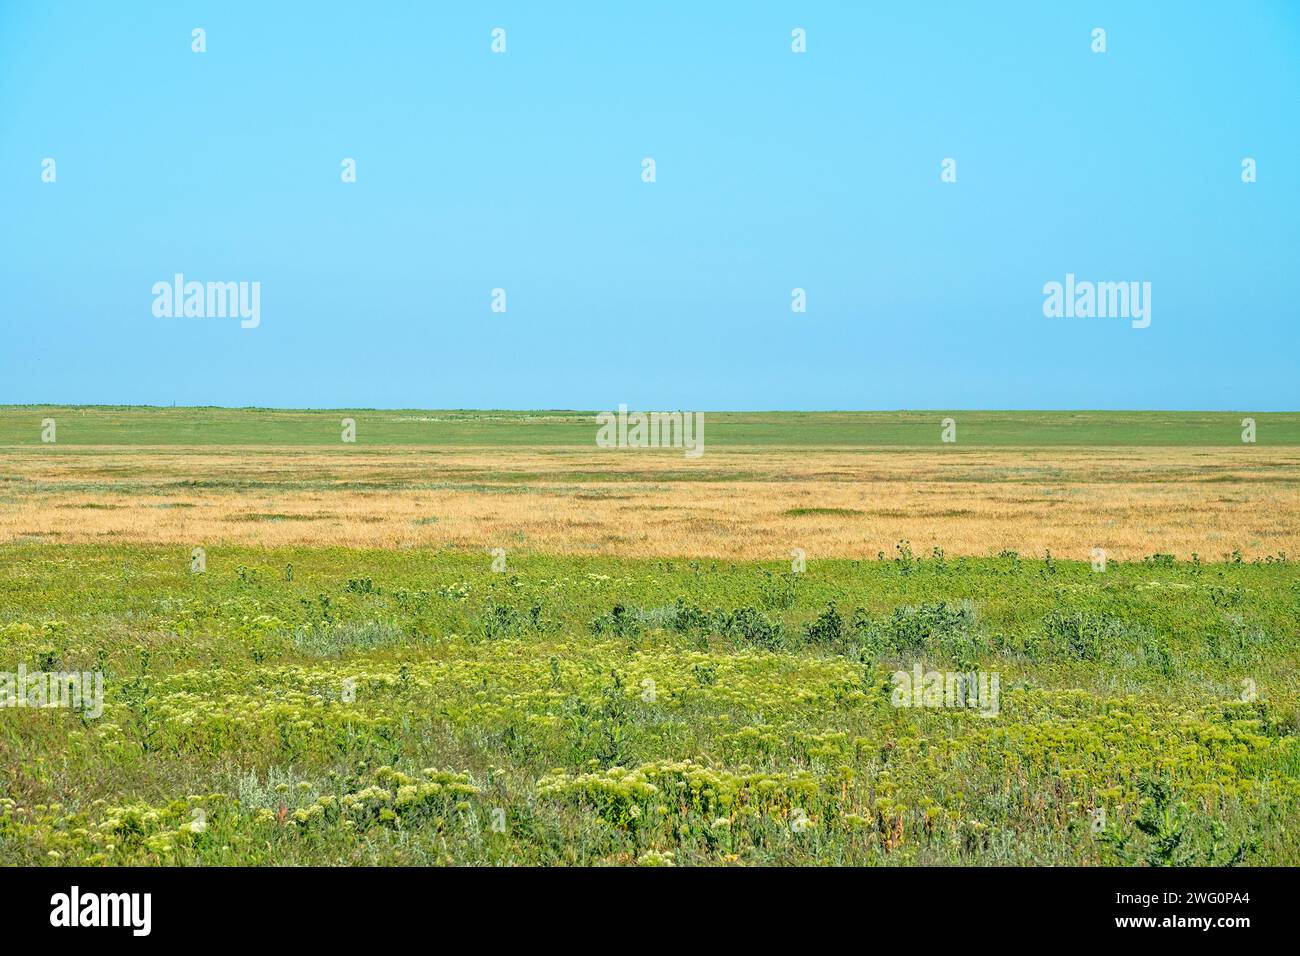 Secondary steppes - smooth brome (Bromus), wheat grass, Agropyrum, Agropyron). Ruderal vegetation in foreground (thistle, pepper wort). Crimea Stock Photo